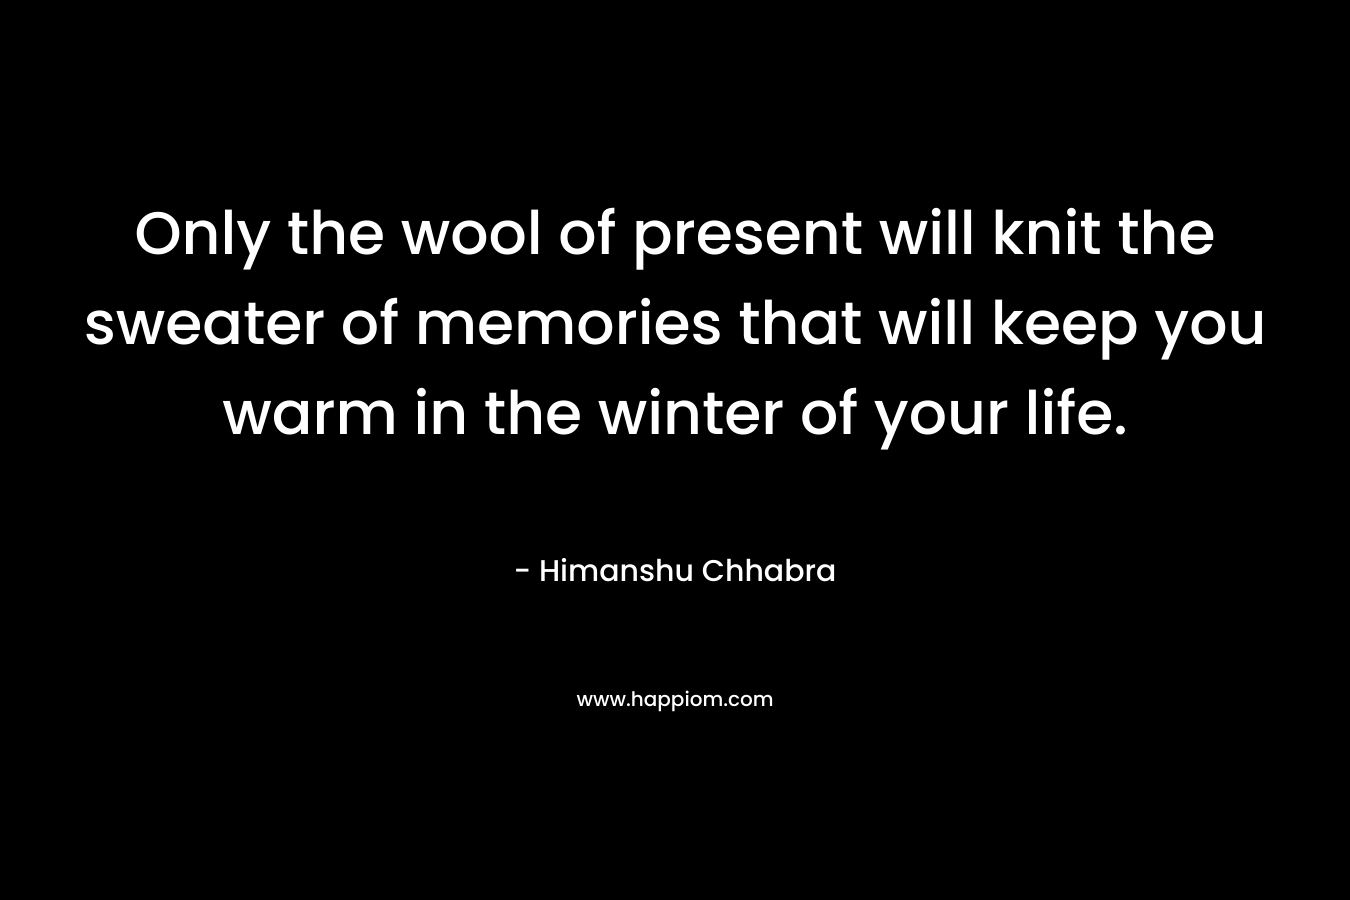 Only the wool of present will knit the sweater of memories that will keep you warm in the winter of your life. – Himanshu Chhabra